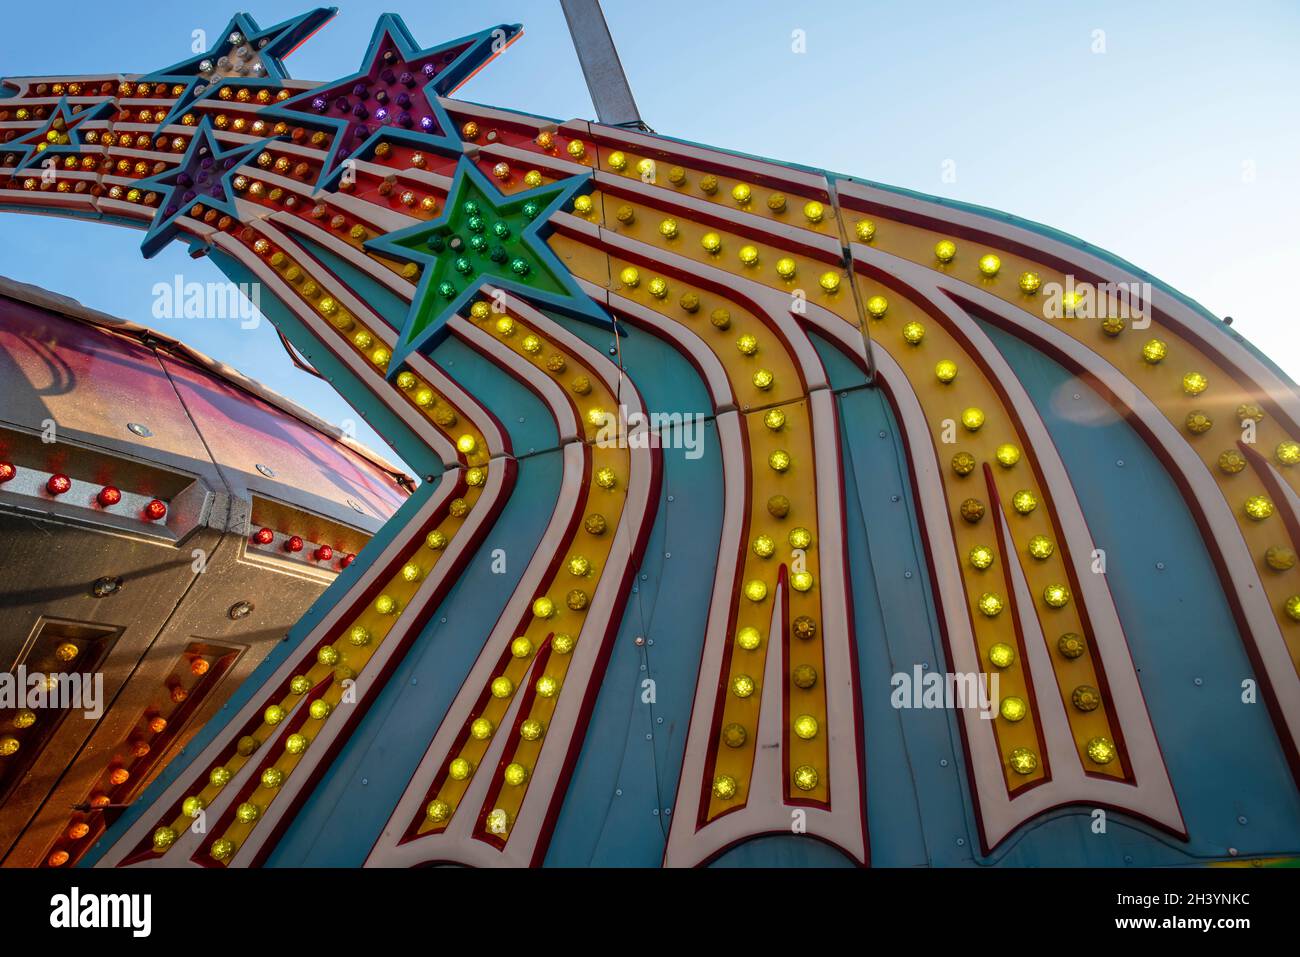 Colorful electric vintage amusement park ride lights with shooting stars Stock Photo